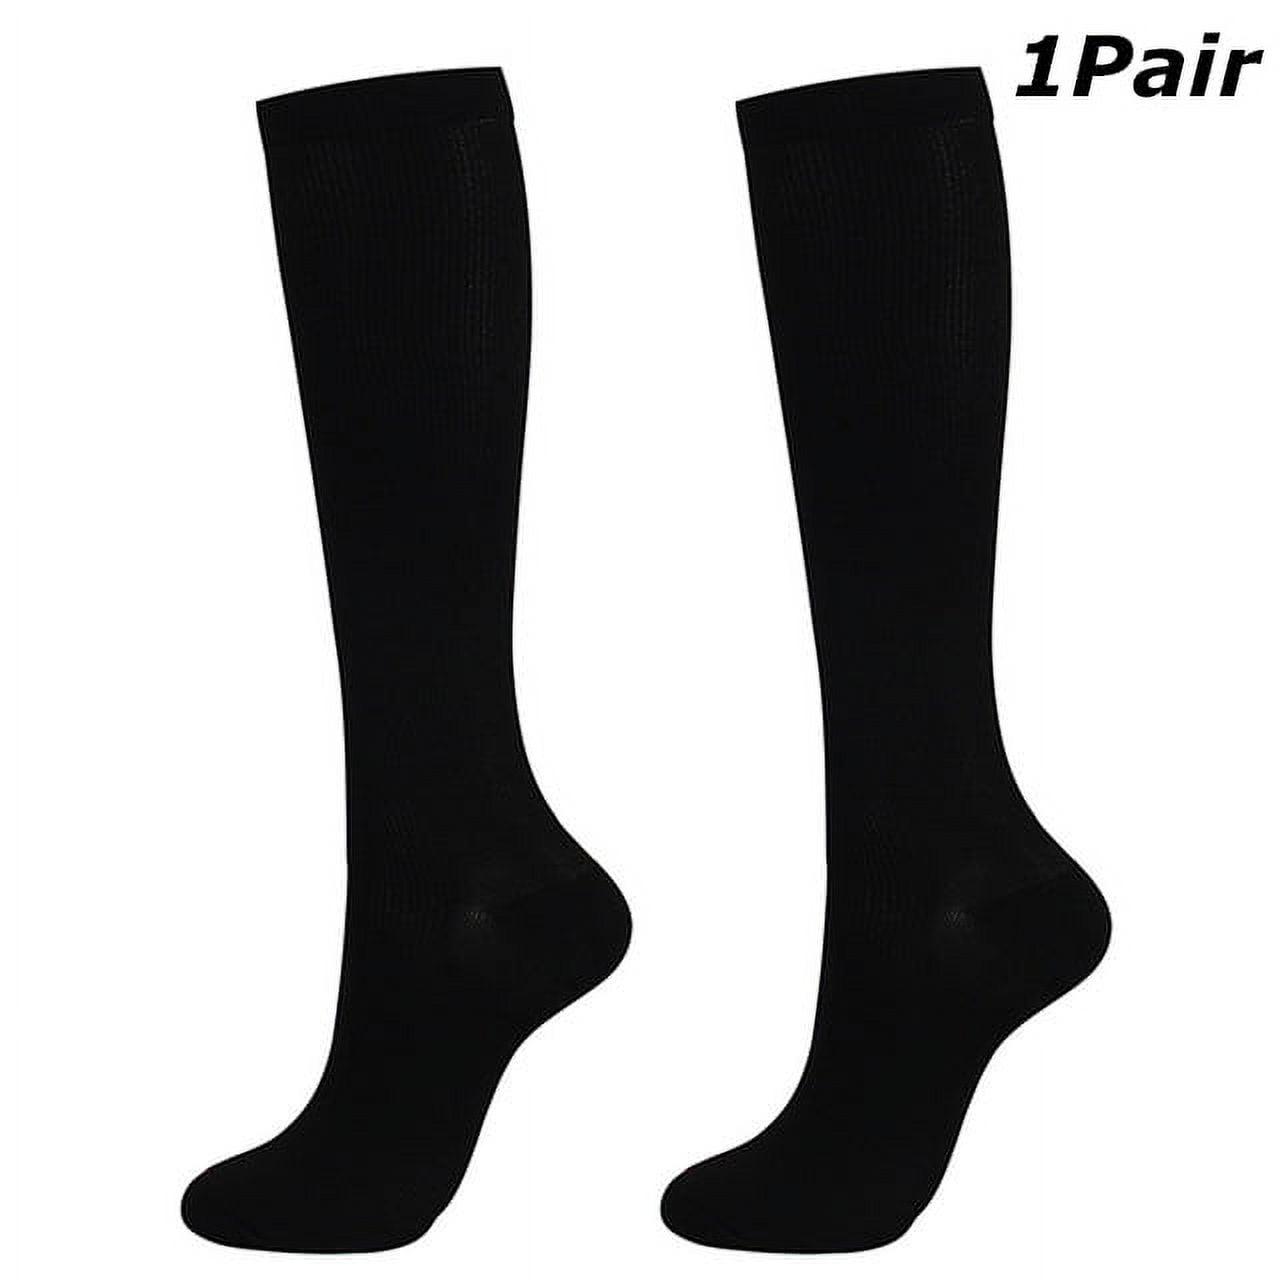 1 Pairs Compression Socks for Men Women Wide Calf Circulation Knee ...